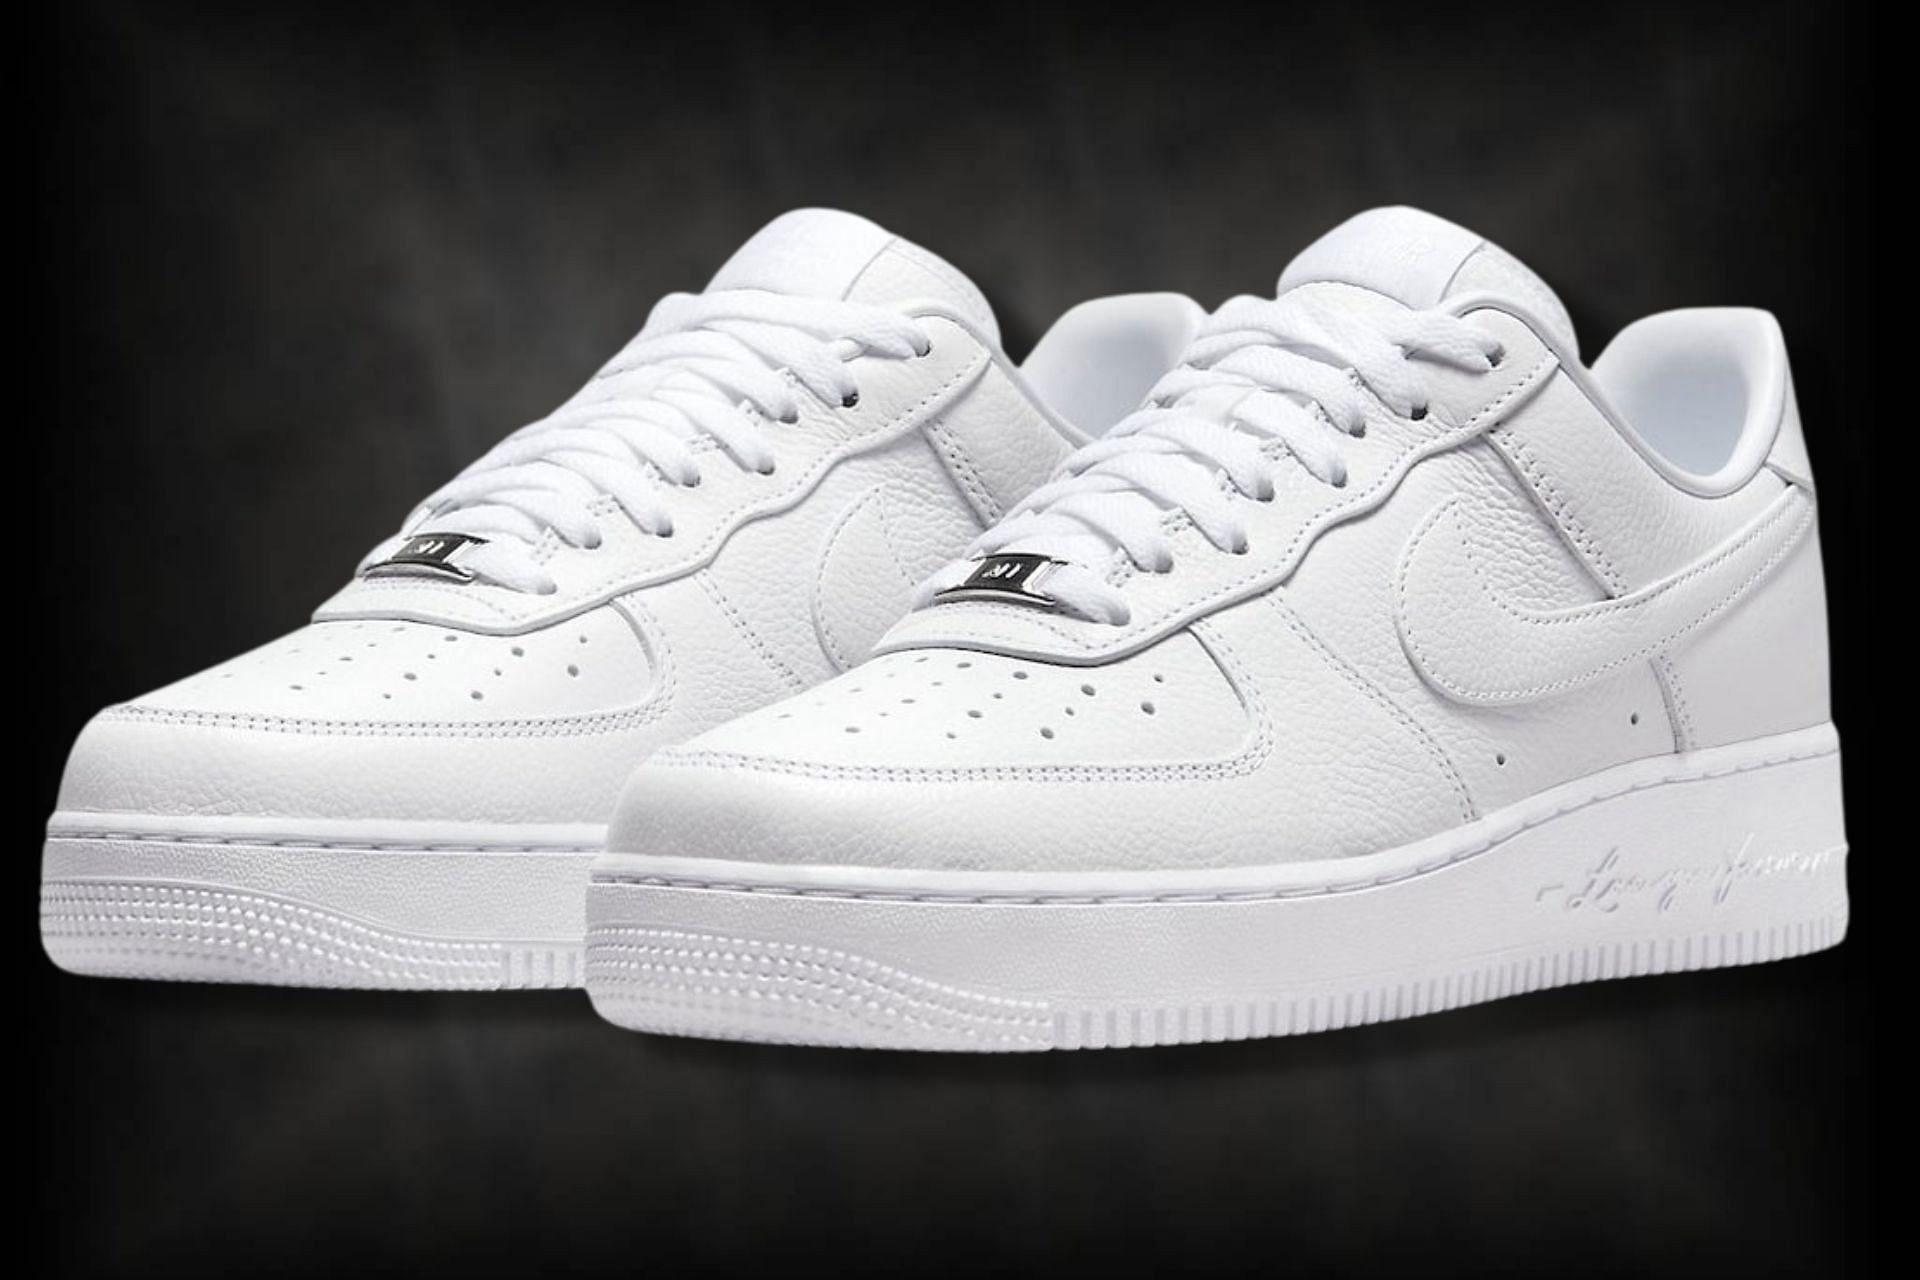 Where to buy Drake NOCTA x Nike Air Force 1 Low Certified Lover